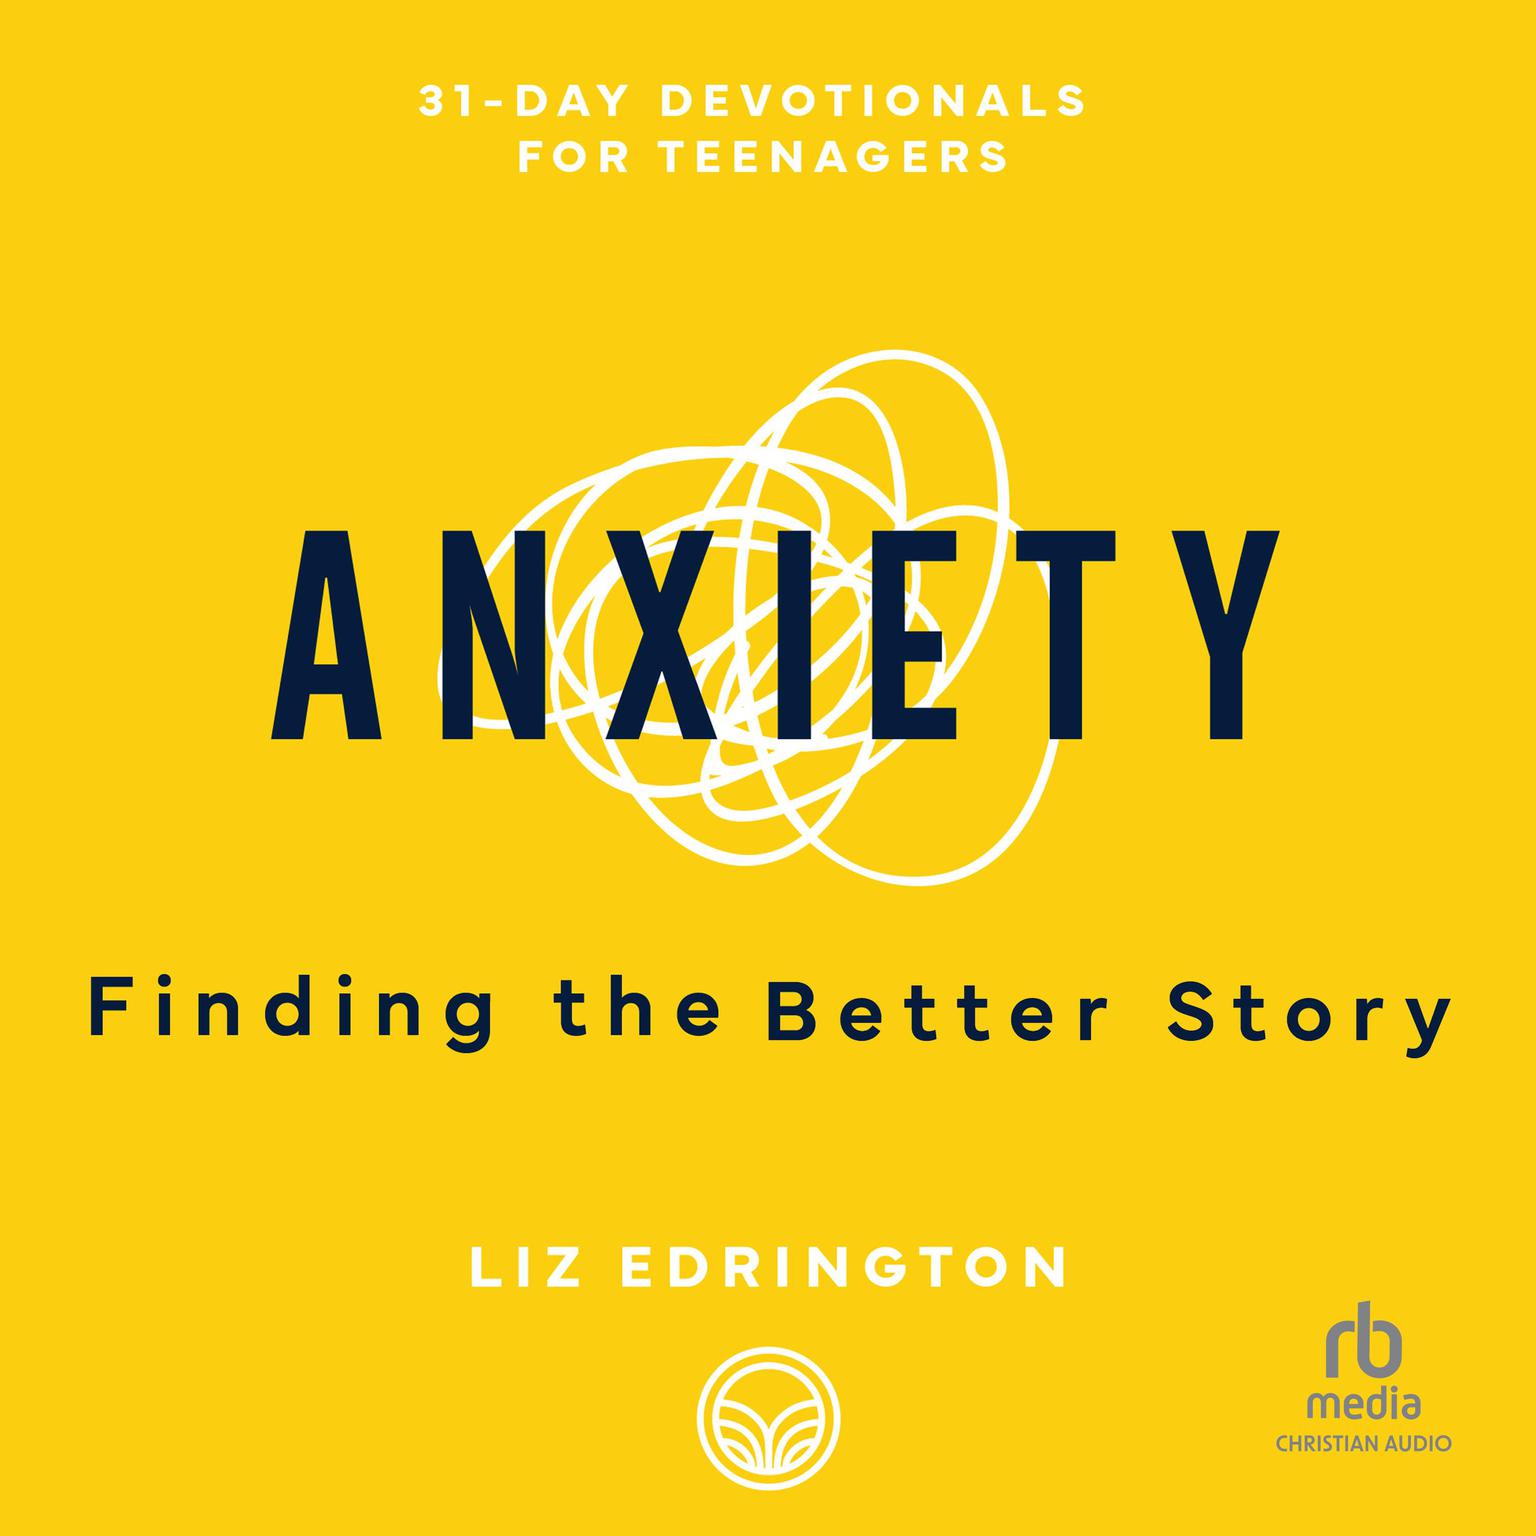 Anxiety: Finding the Better Story (31-Day Devotionals for Teenagers) Audiobook, by Liz Edrington